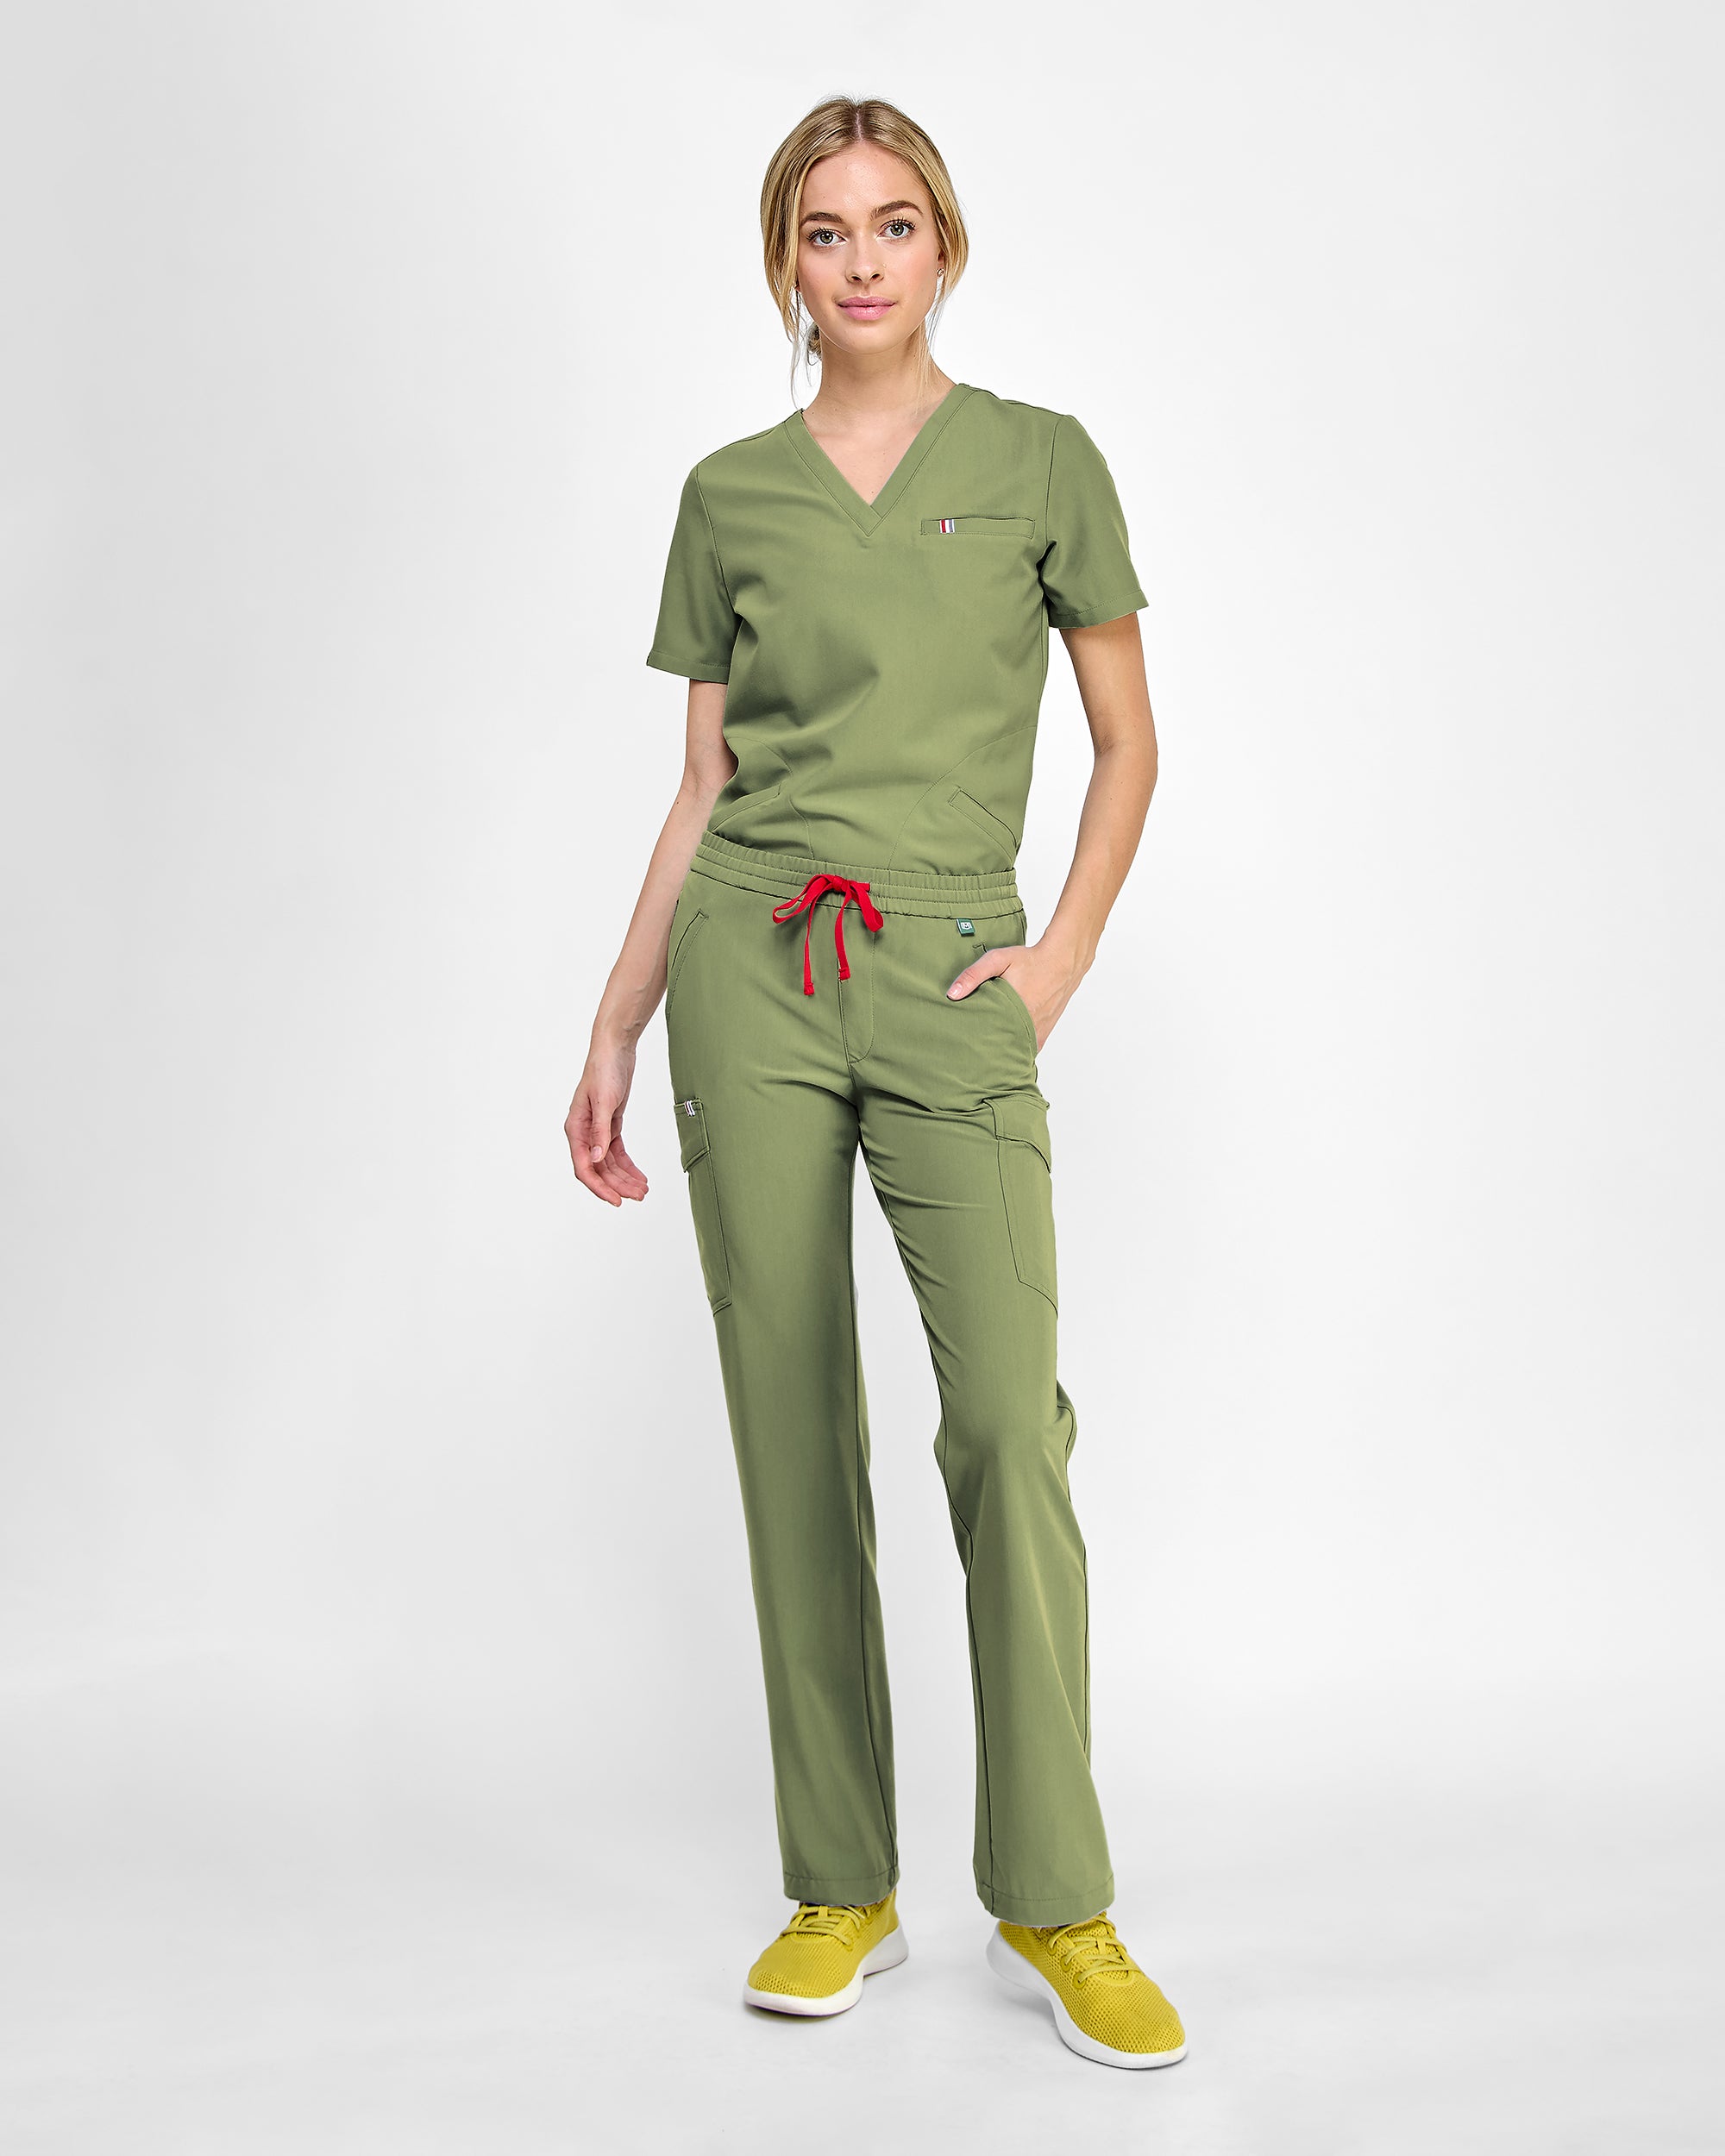 Green Town Scrubs for Women - Jogger Scrub Pant, Cargo Pockets, Stretch  Fabric, Drawcord, Easy Care